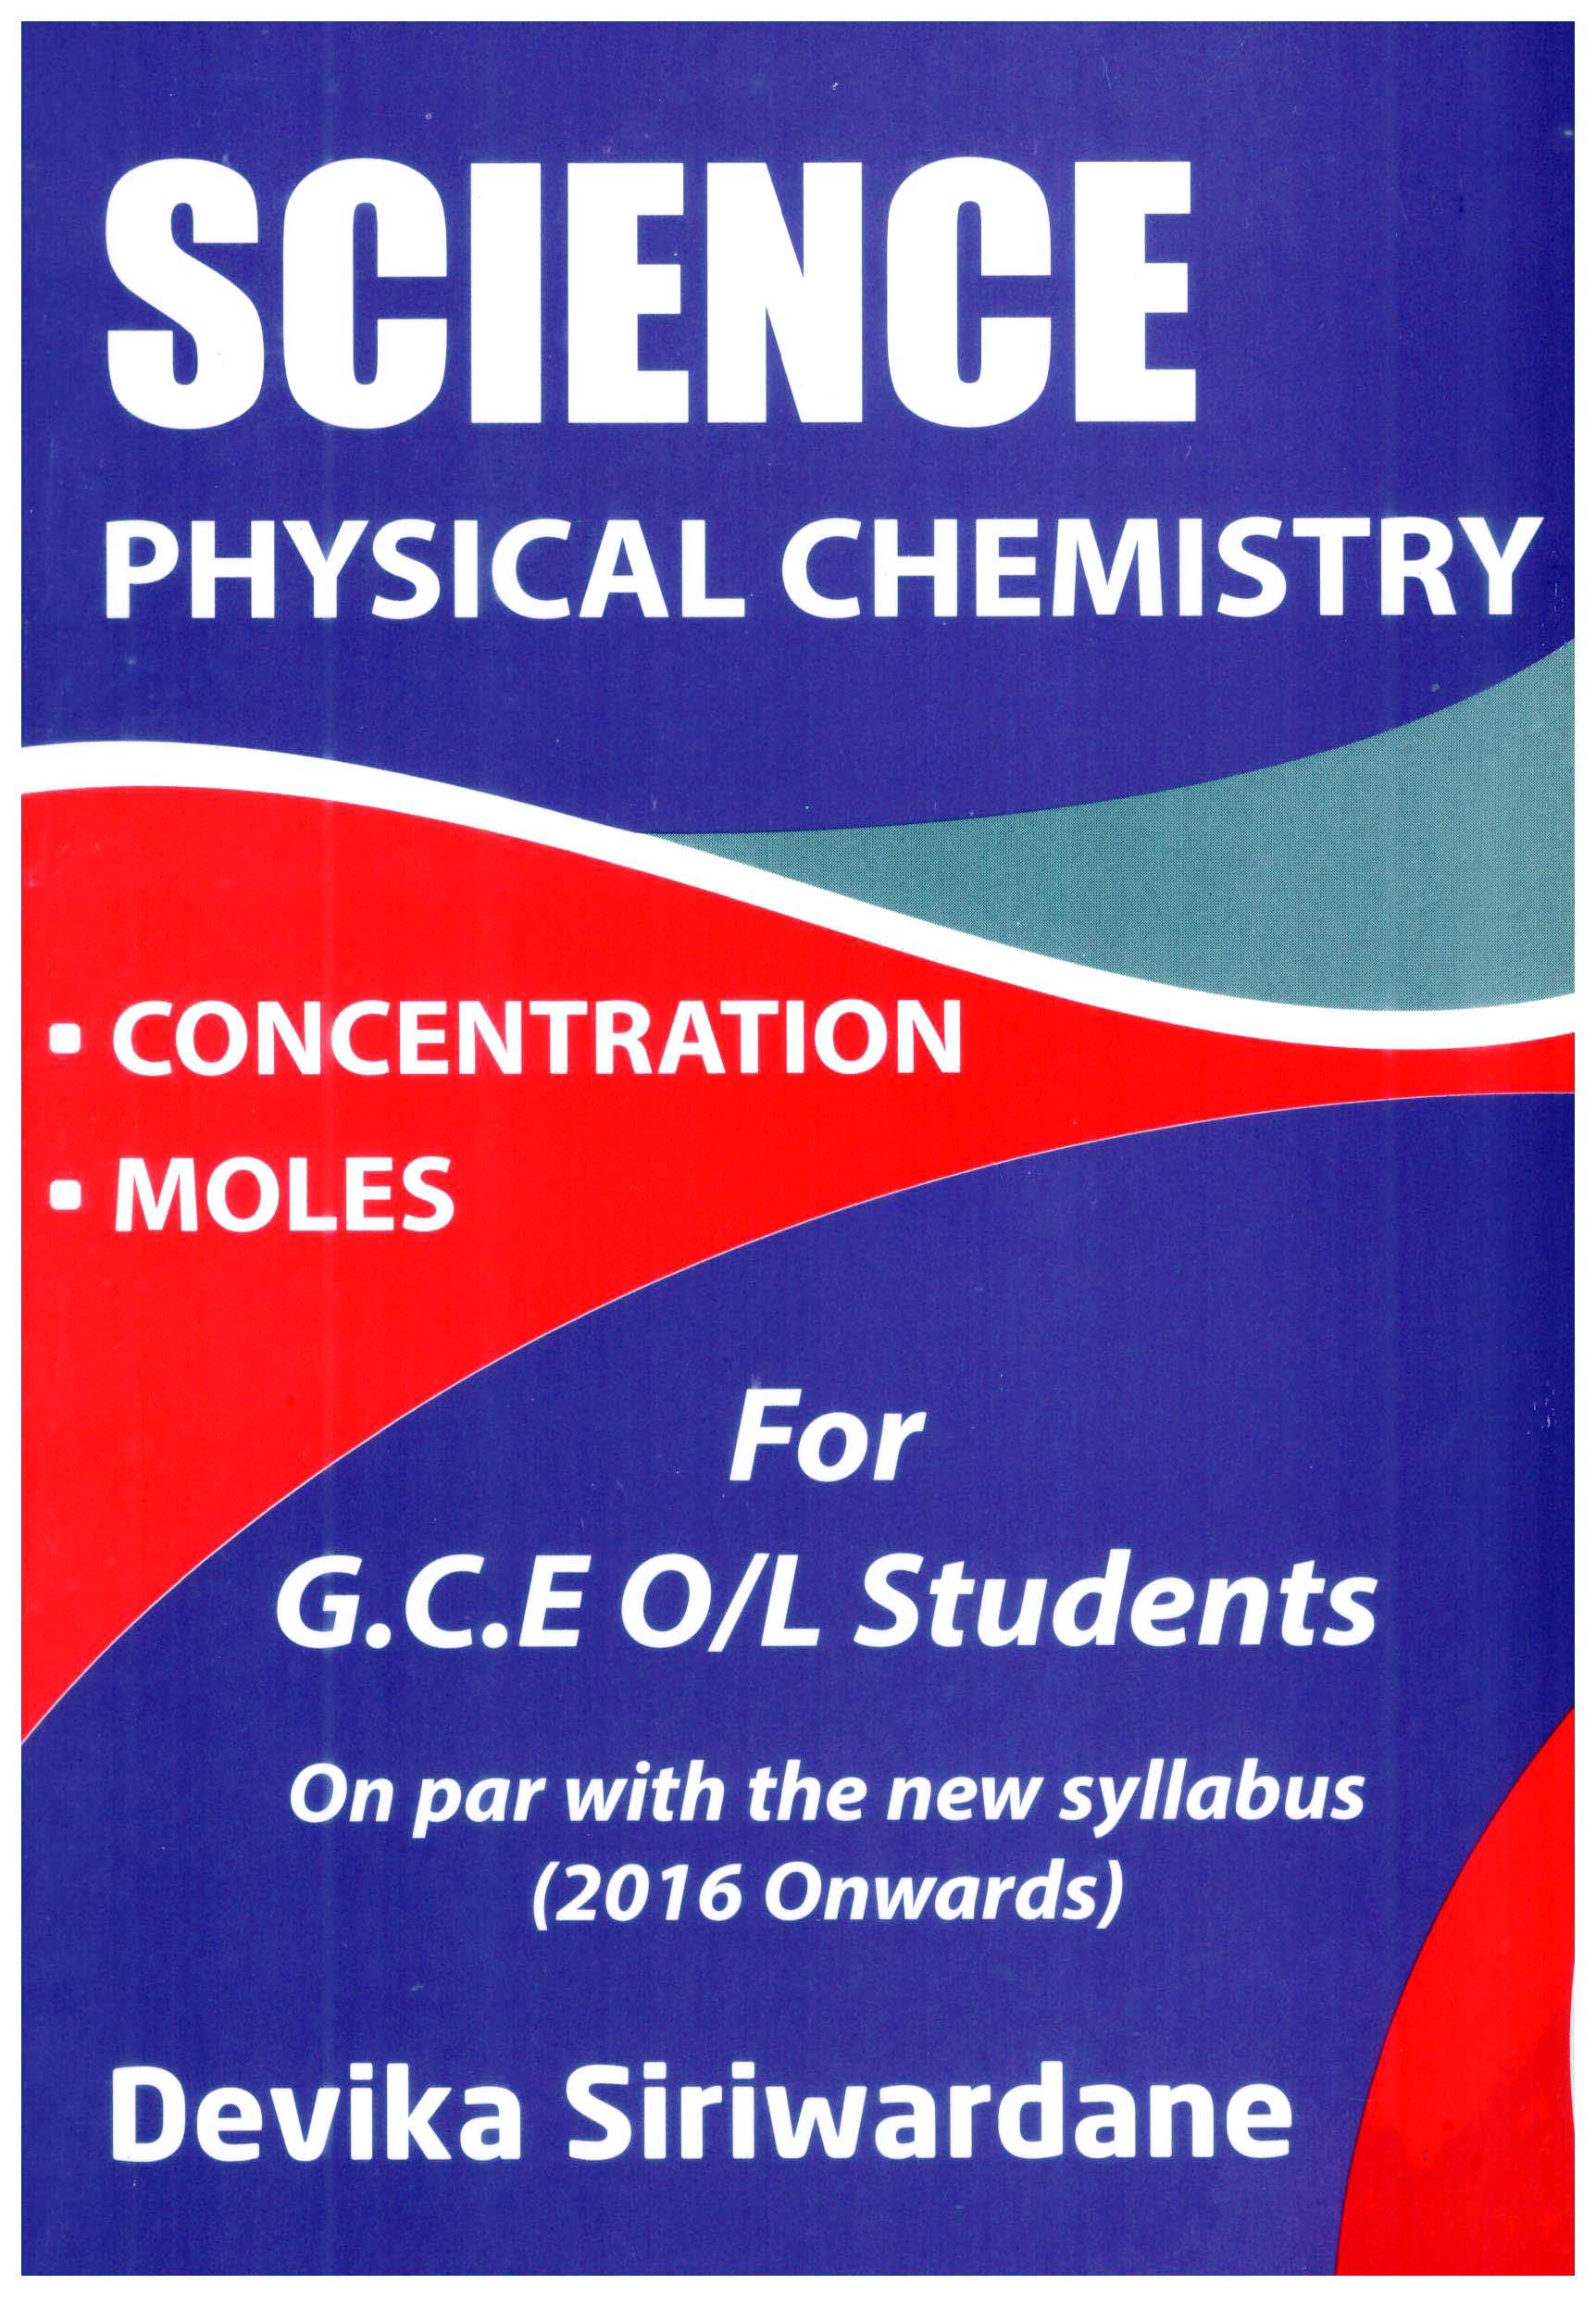 Science Physical Chemistry for G.C.E O/L Students